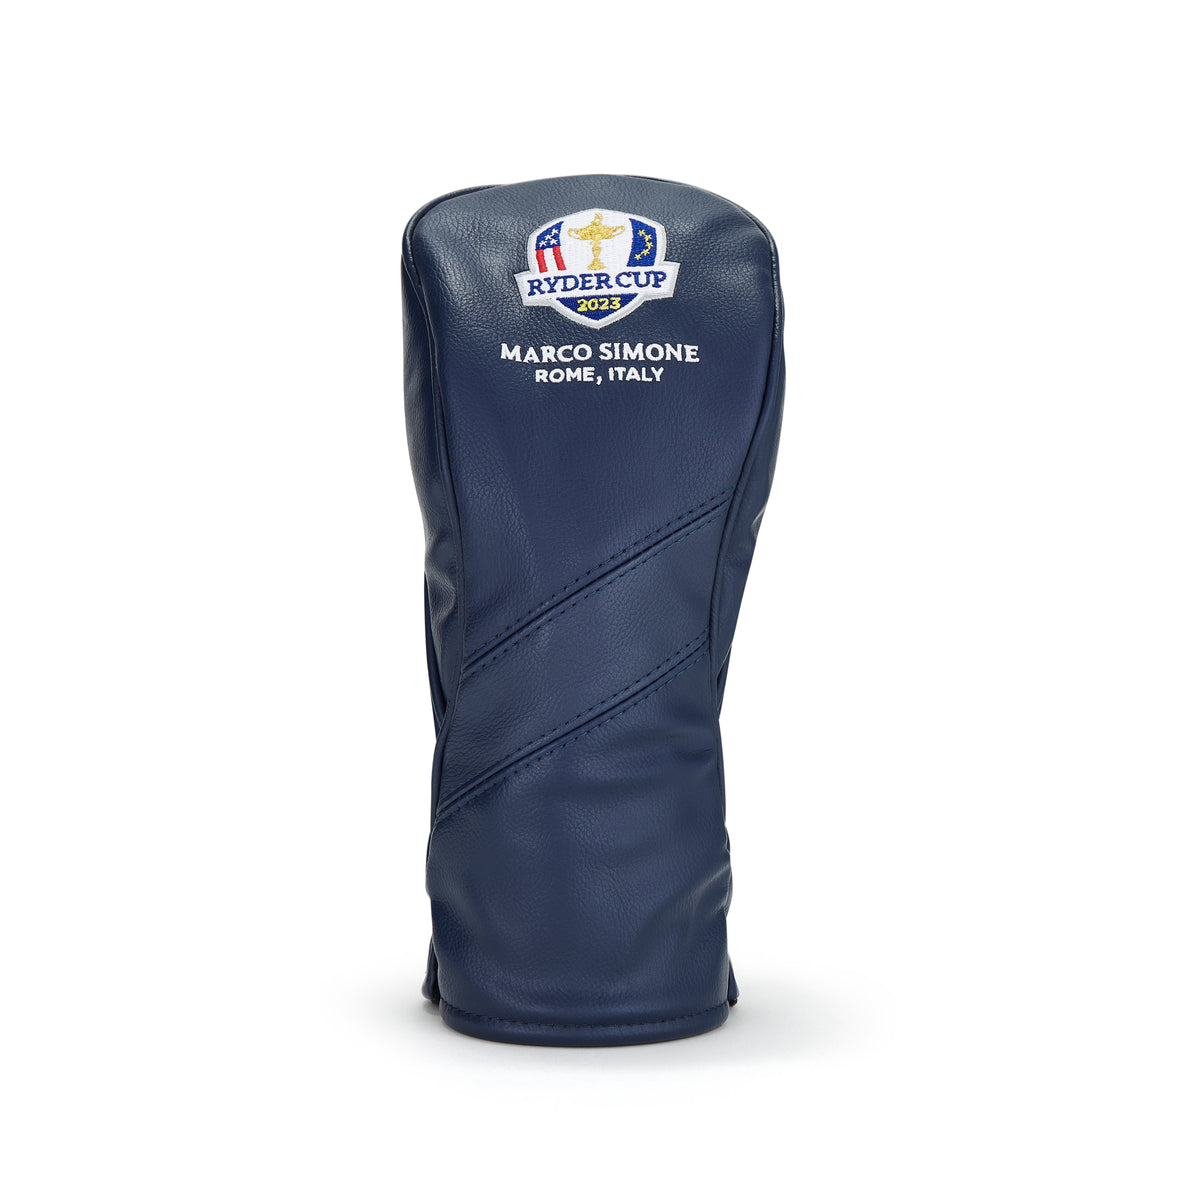 2023 Ryder Cup PRG Fairway Head Cover